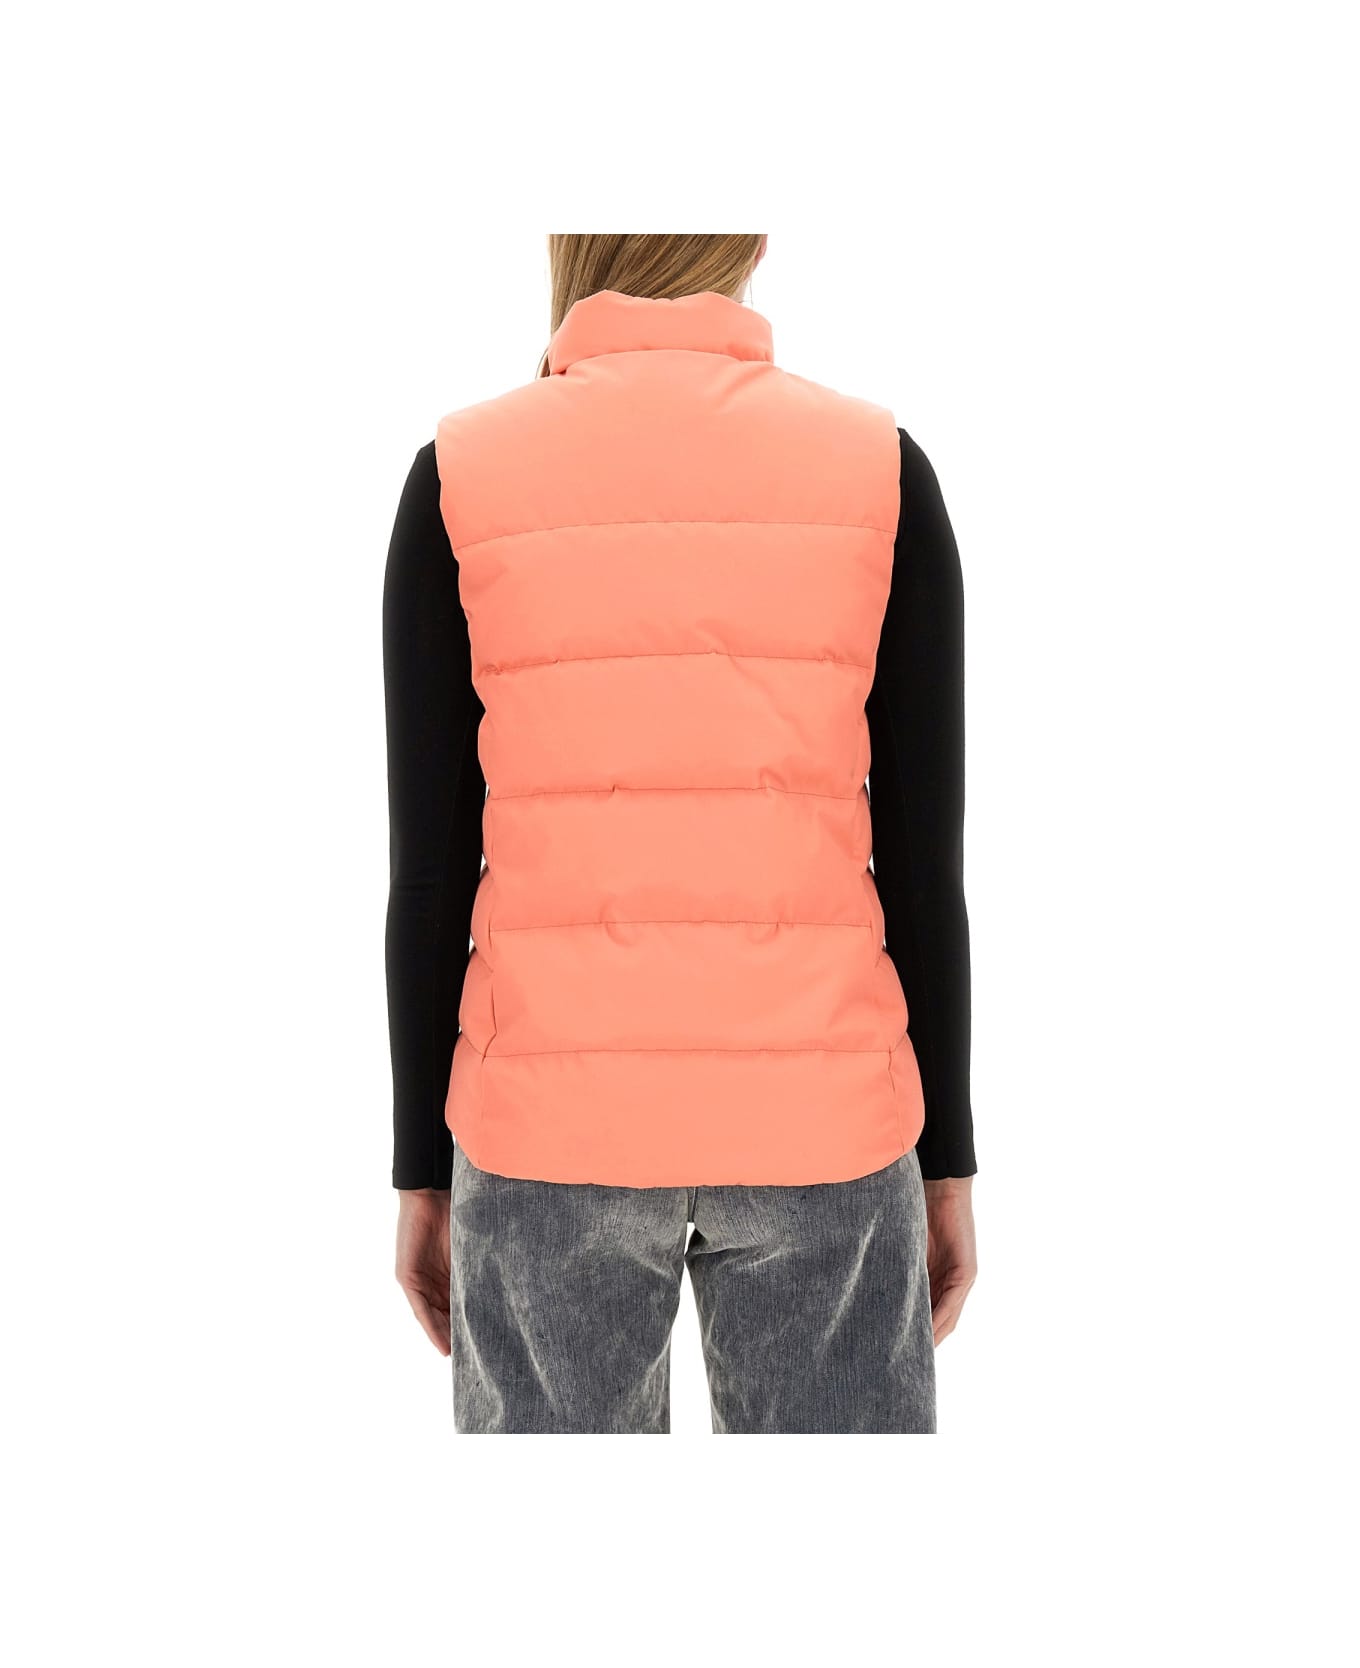 Canada Goose Padded Vest With Logo - PINK